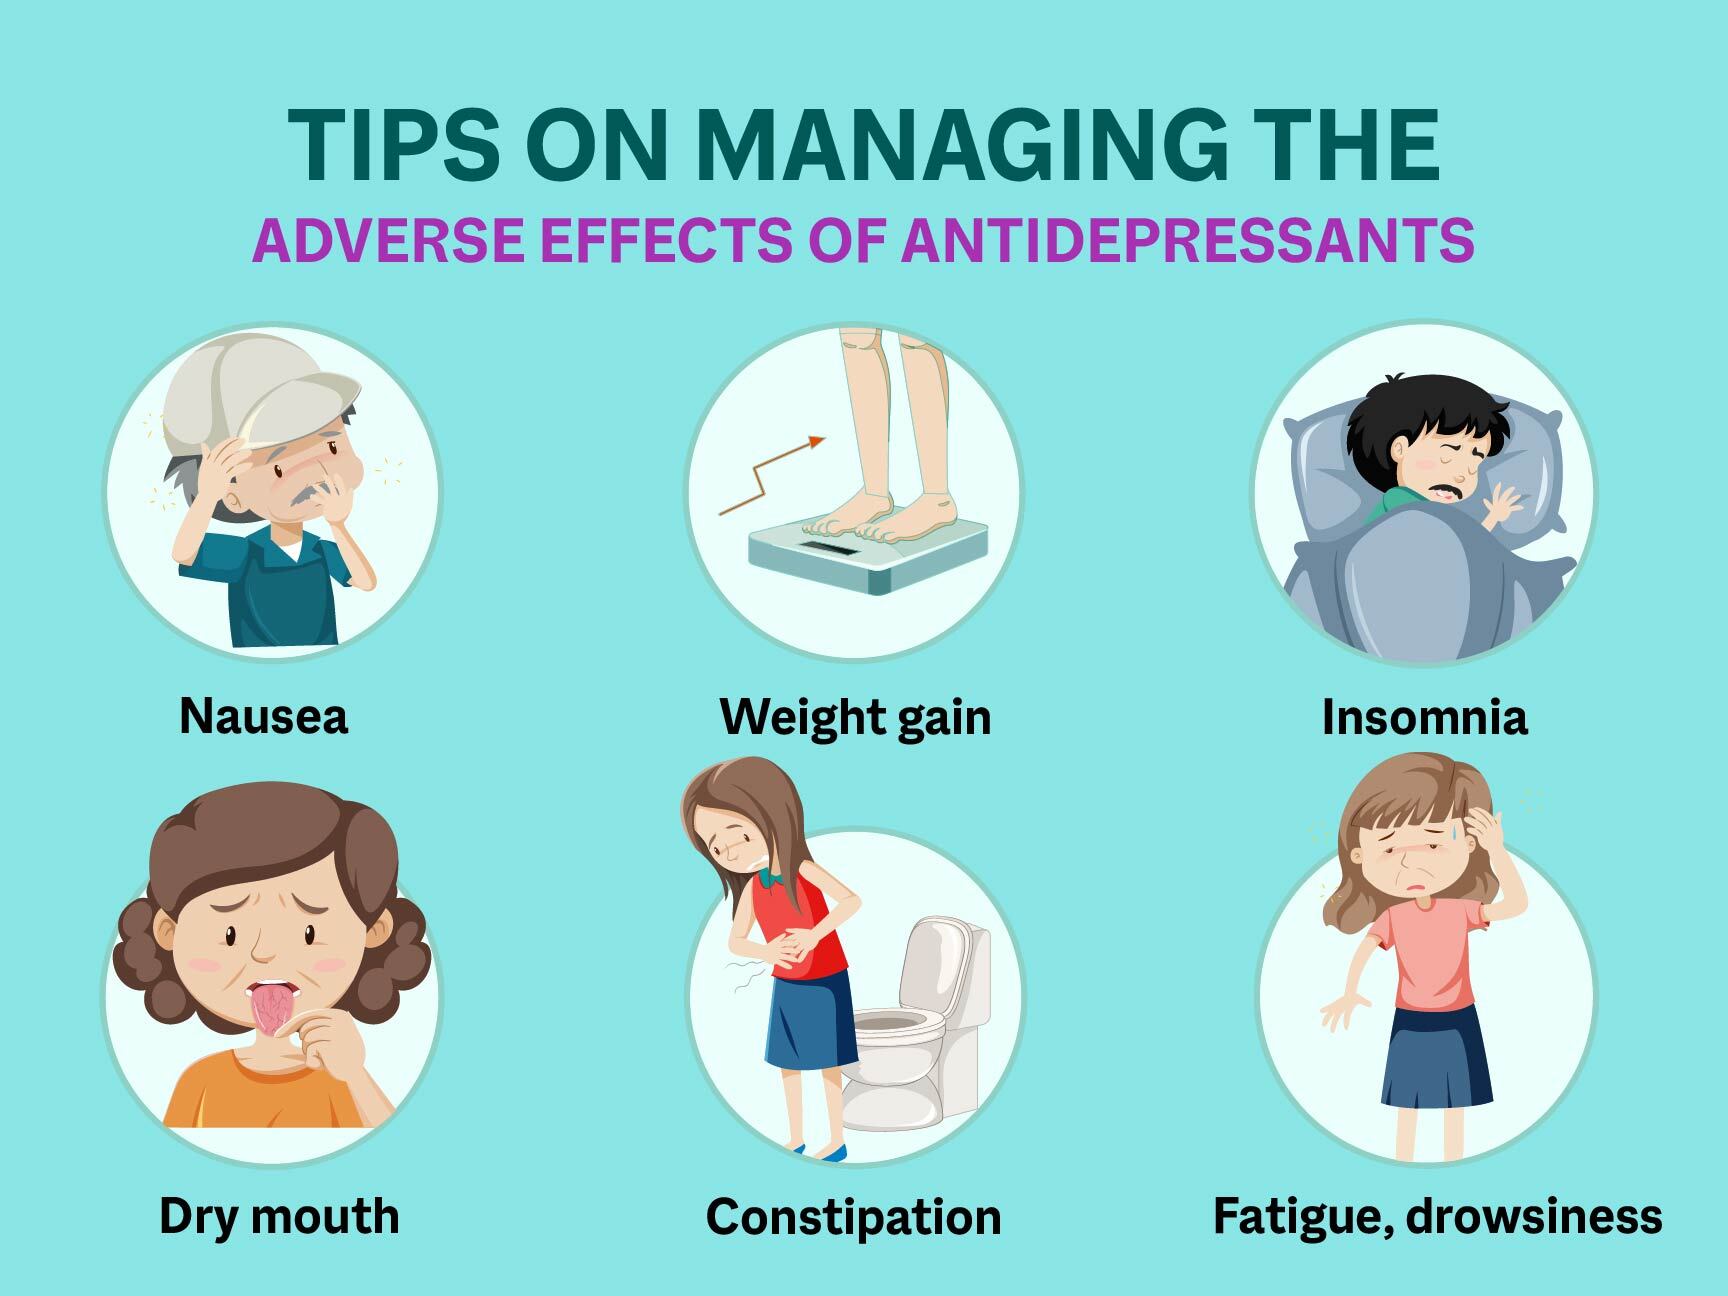 Tips on Managing the Adverse Effects of Antidepressants